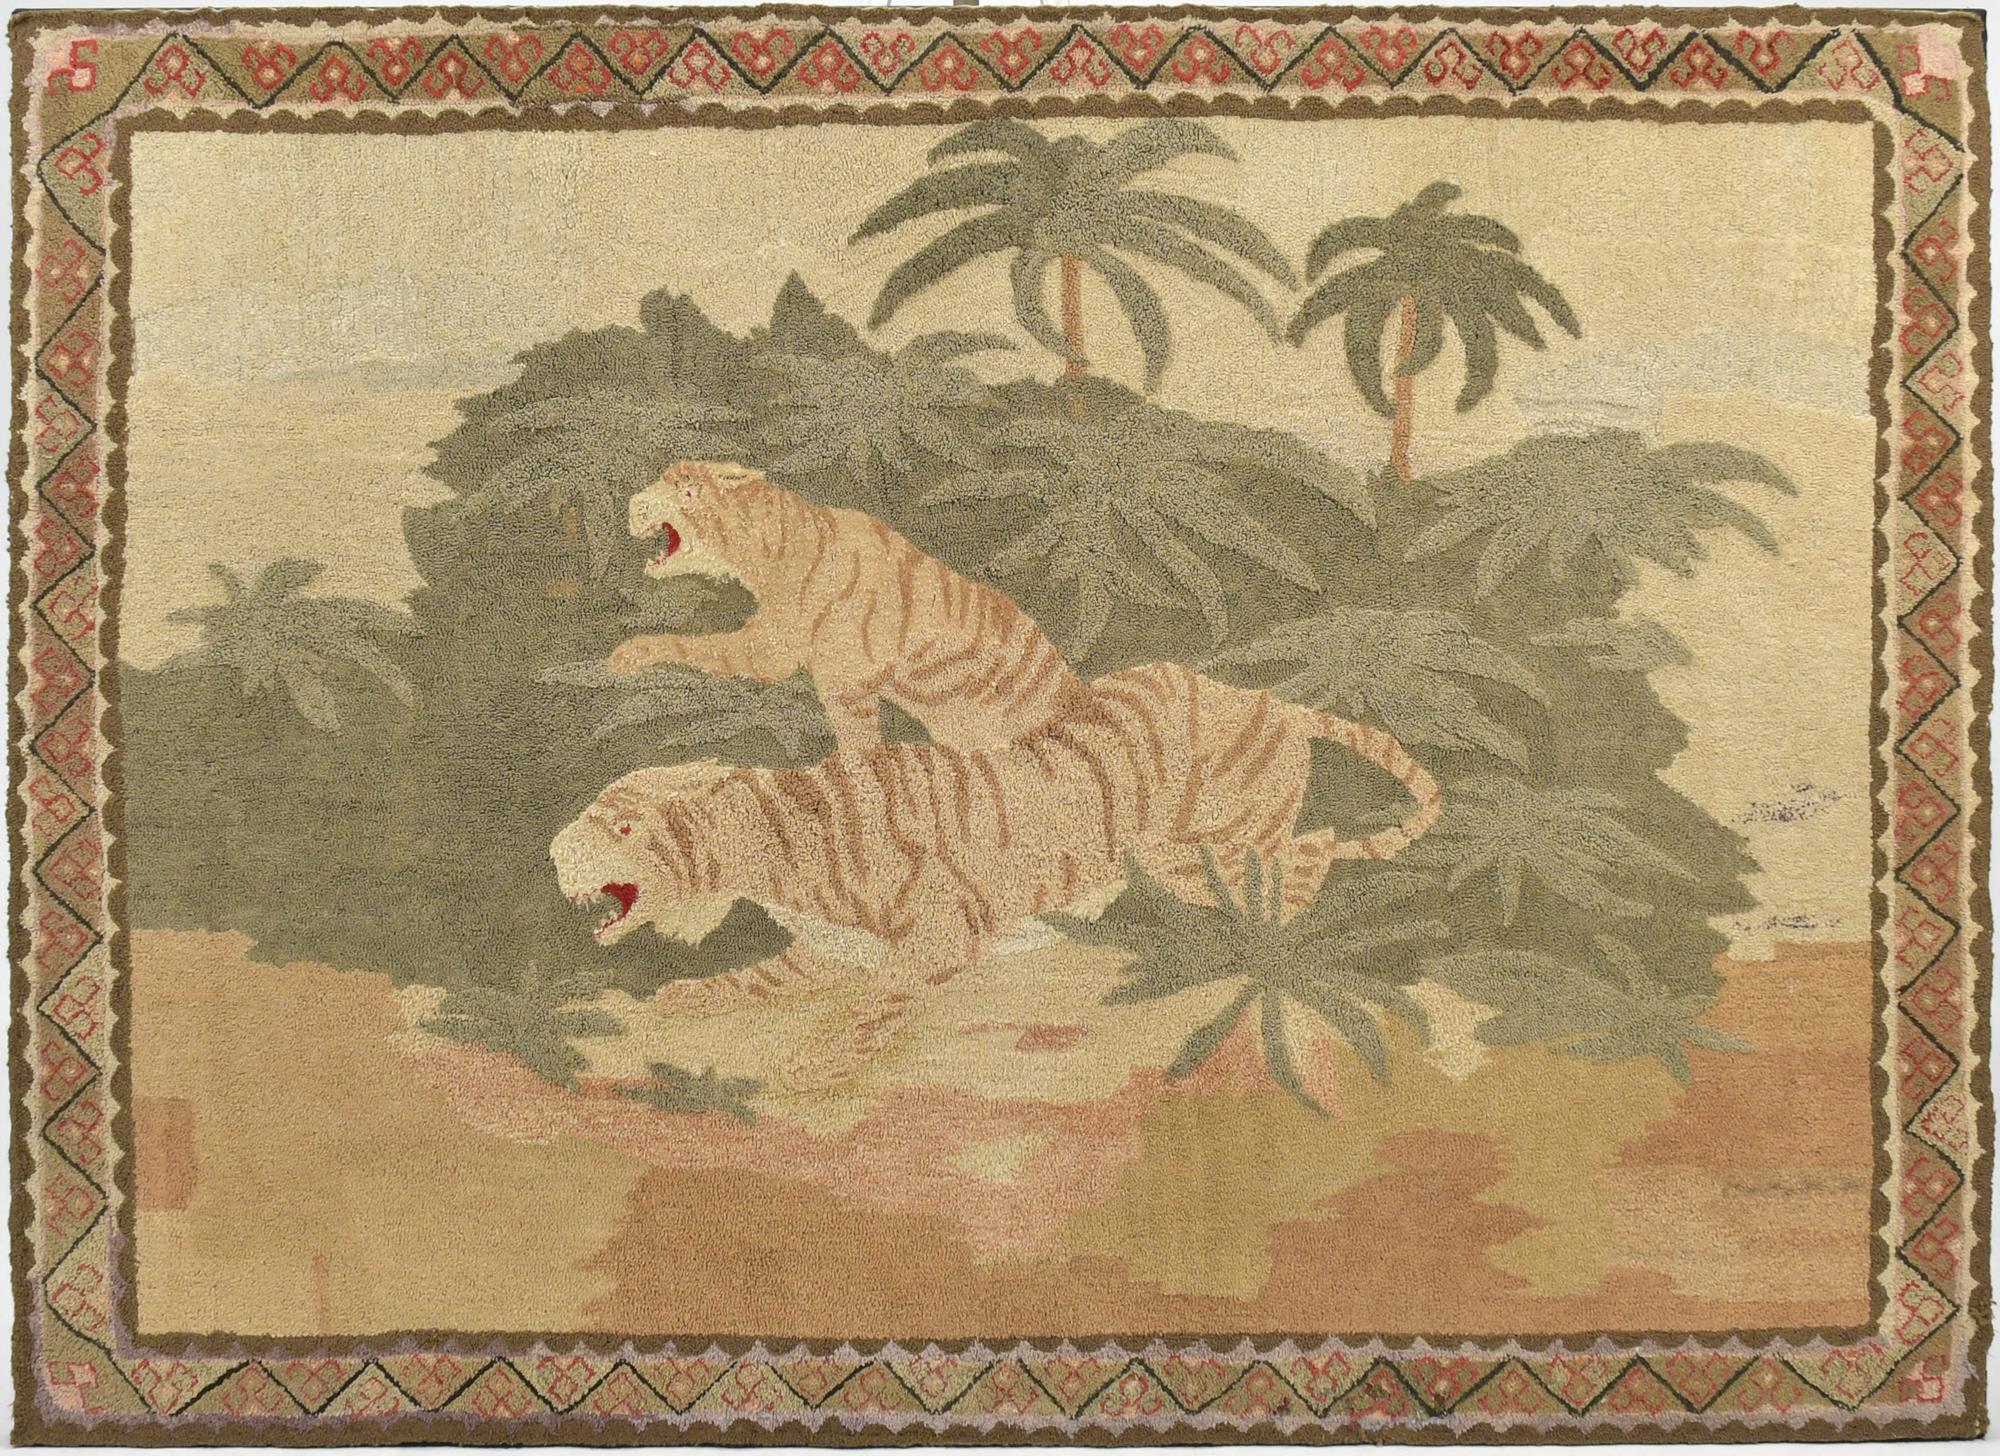 LARGE 19TH C HOOKED RUG TIGERS  3ac897